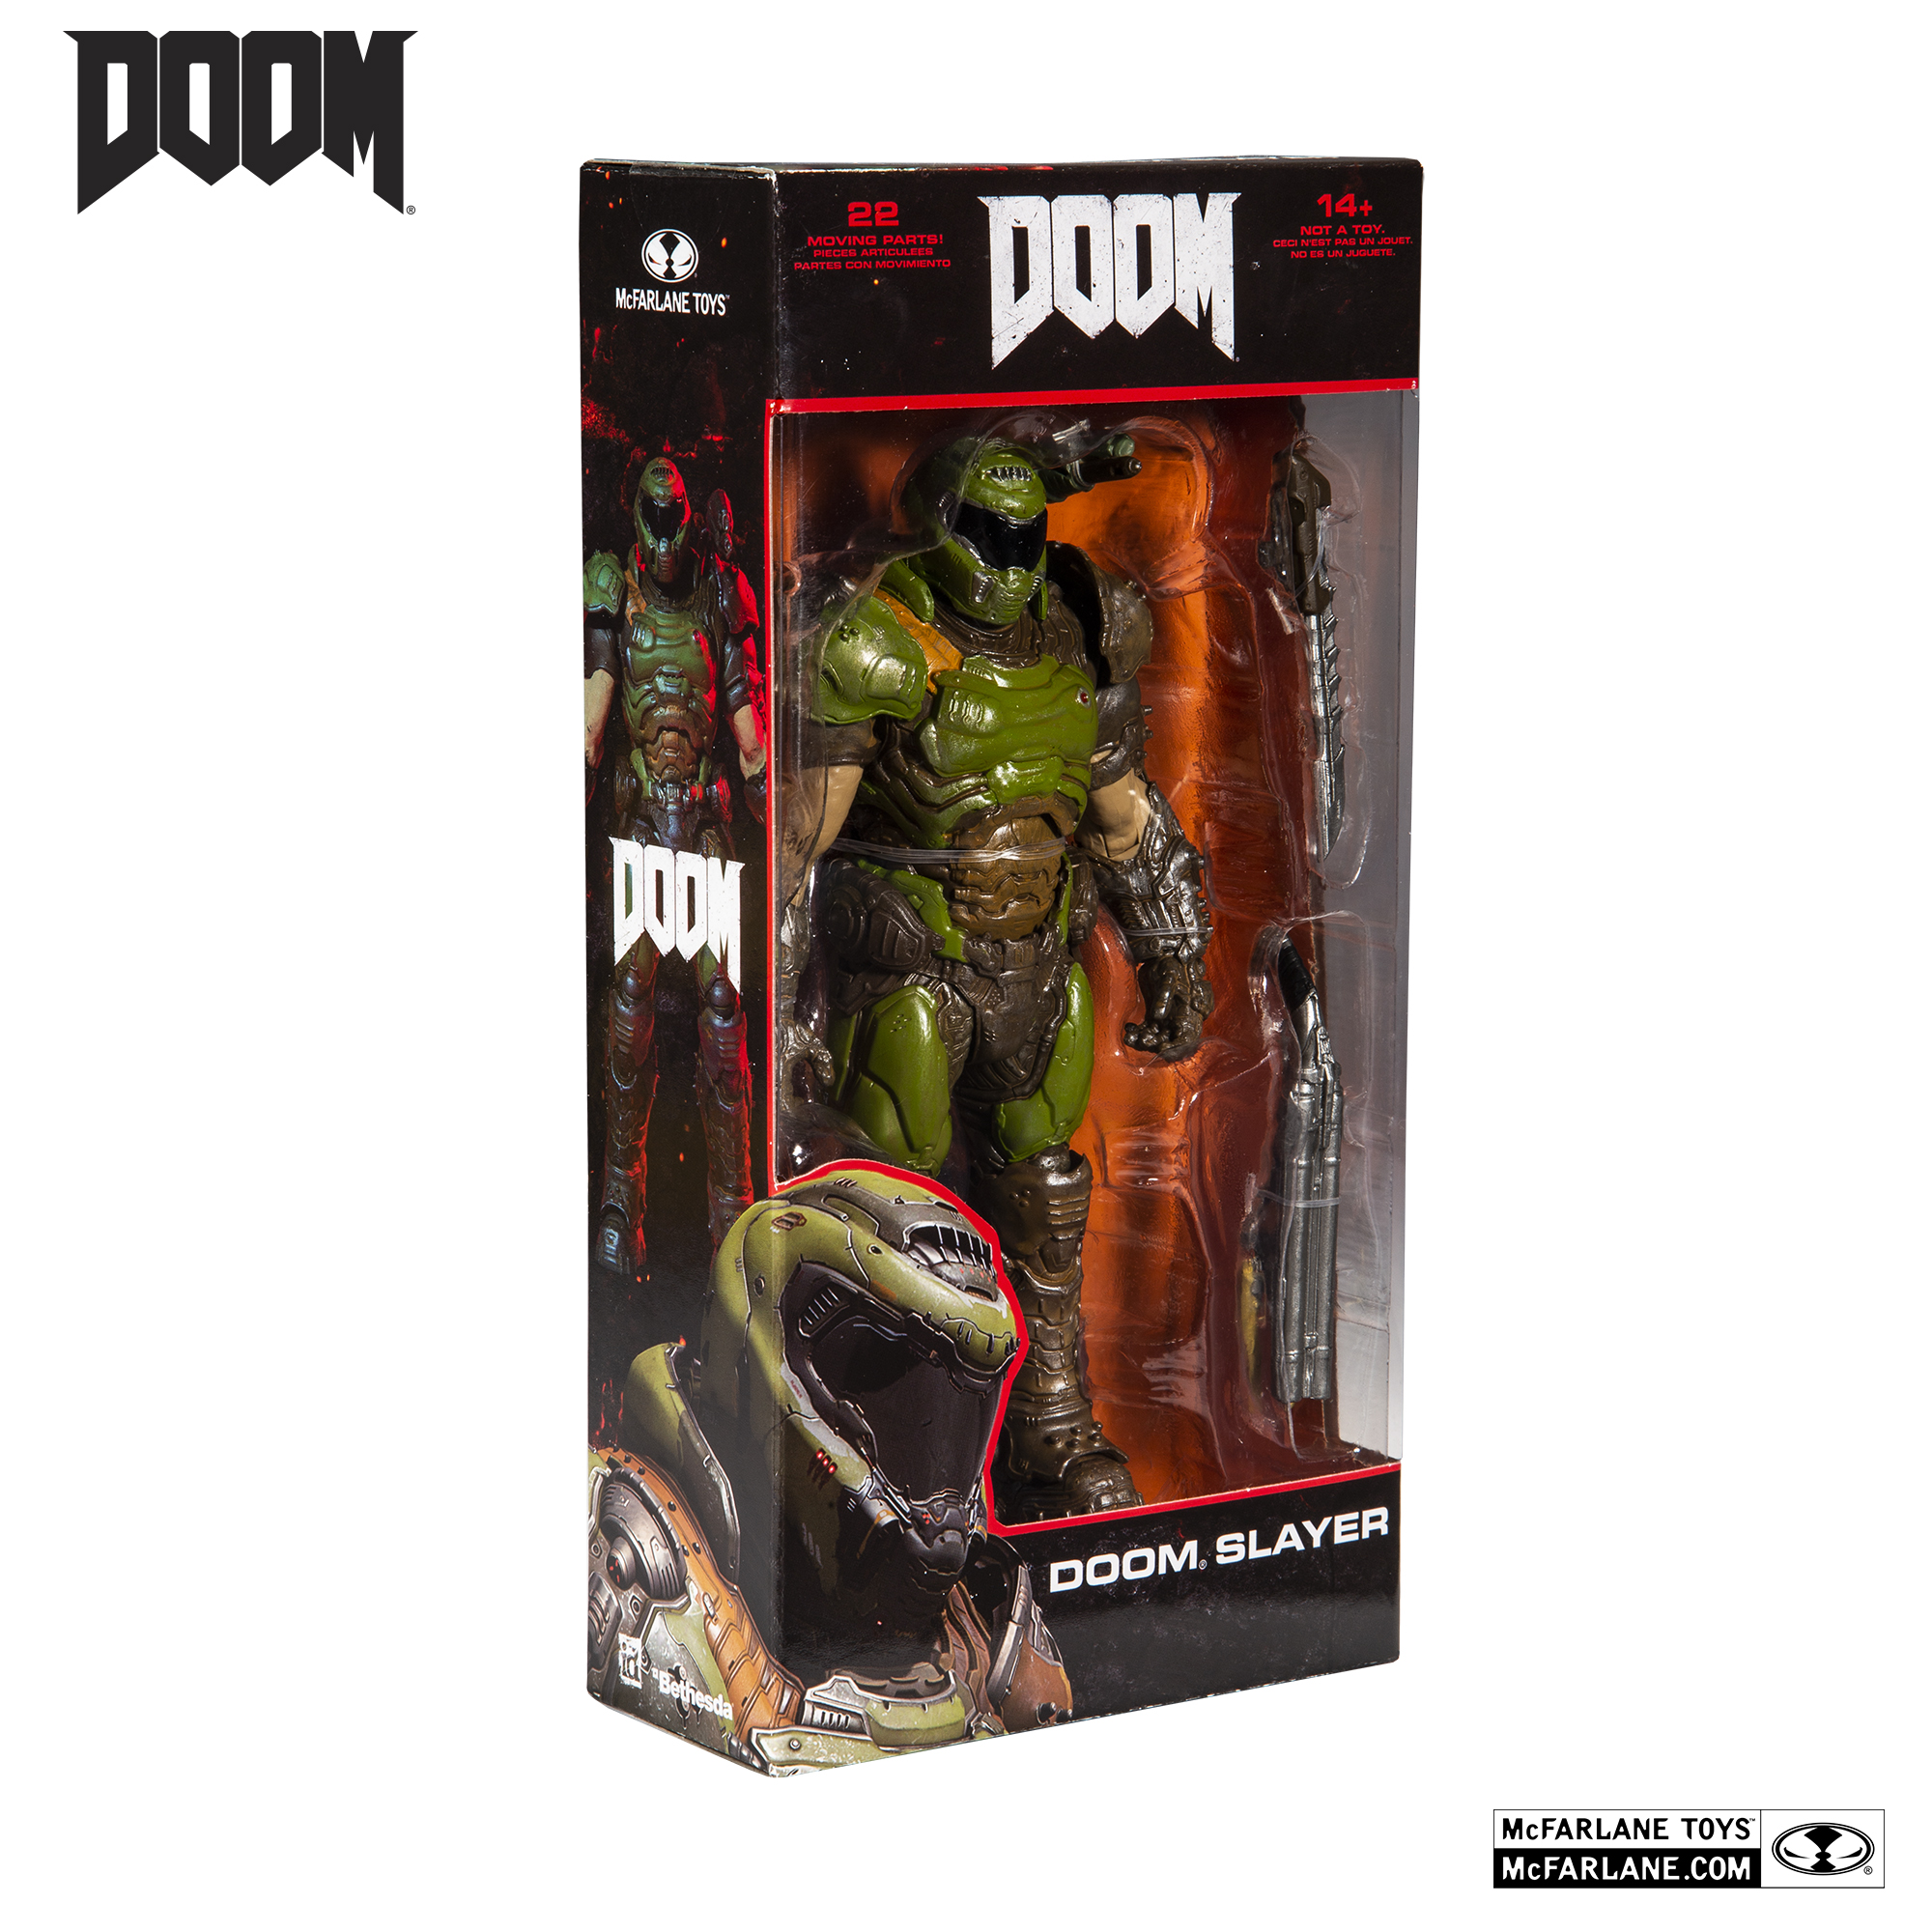 Details about   New doom eternal the doom slayer official action figure by mcfarlane toys show original title